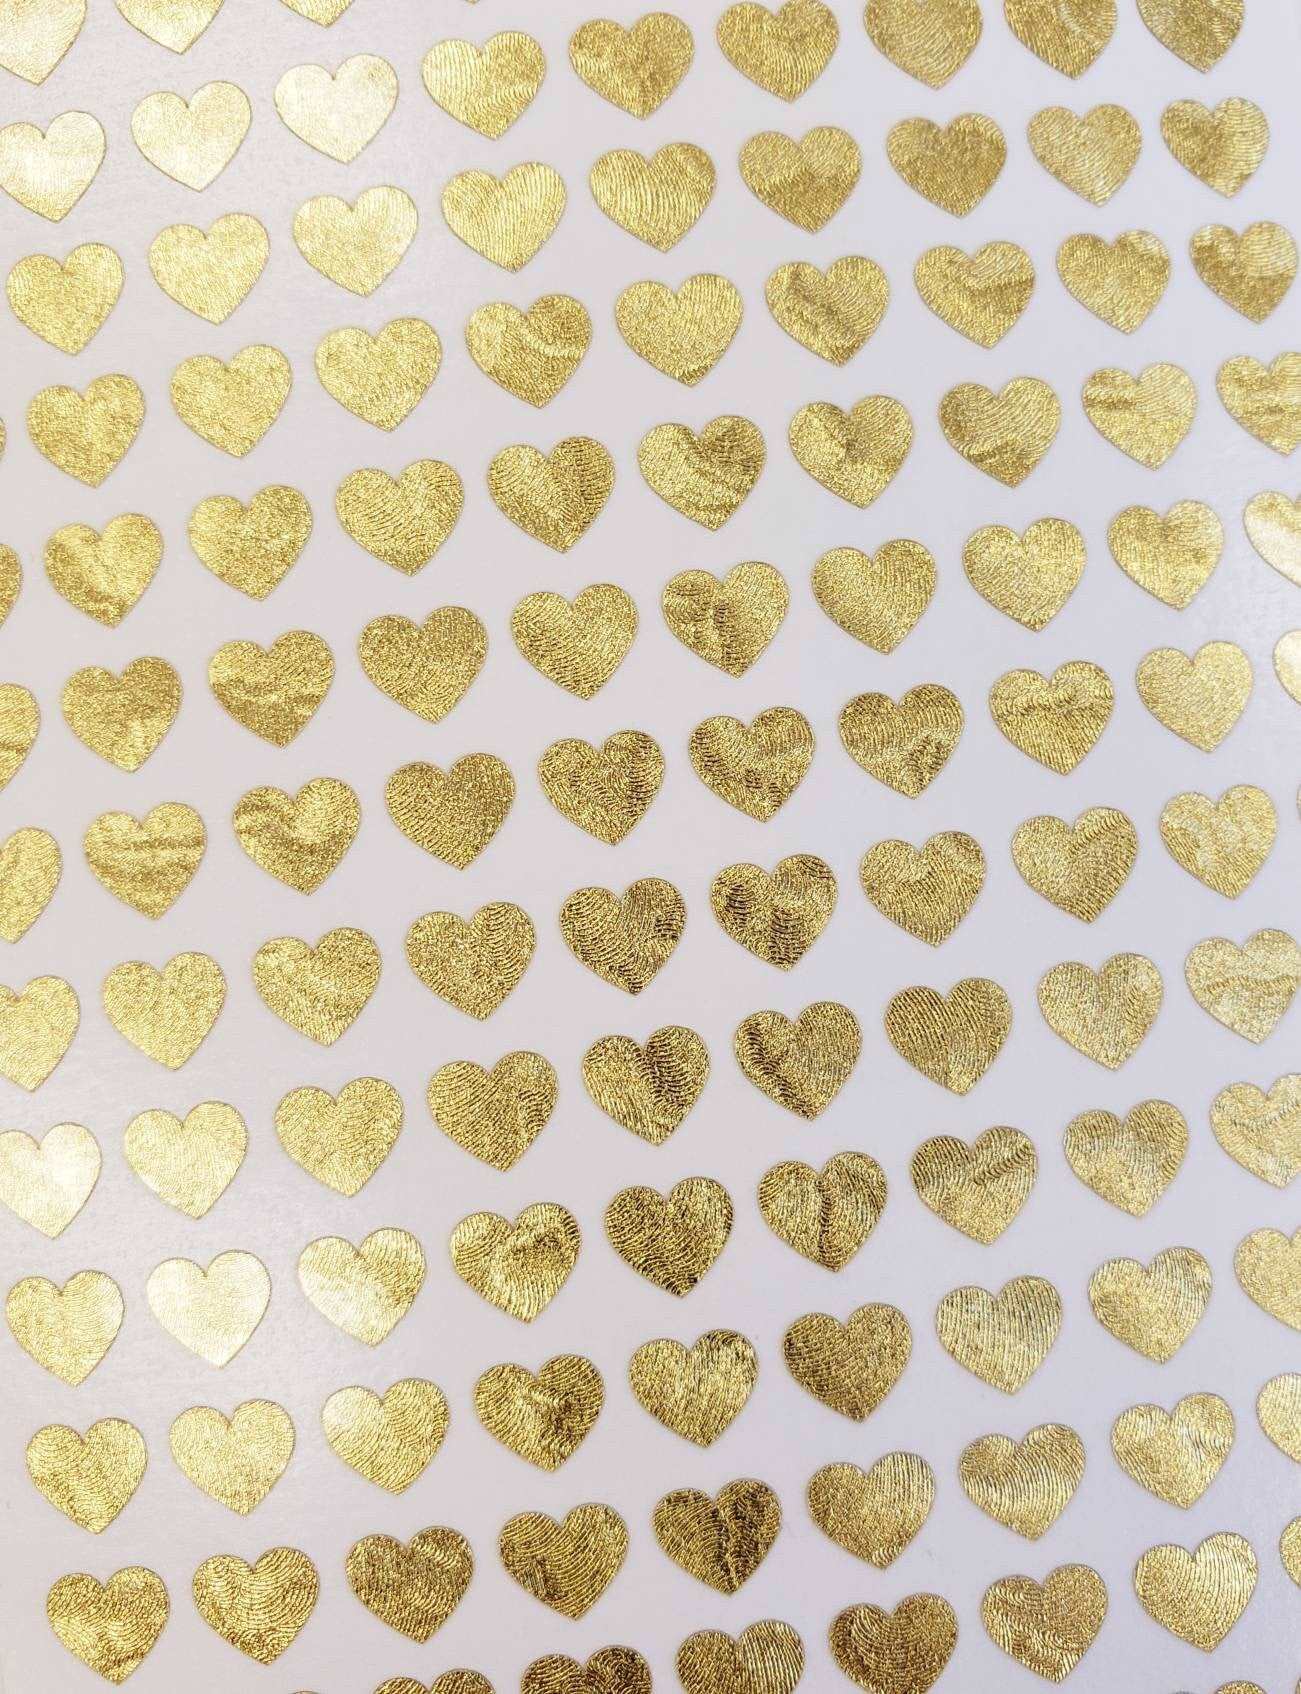 Gold Heart Stickers, set of 285 hearts, gloss metallic gold heart vinyl decals, wedding meal choice stickers, adhesive vinyl hearts